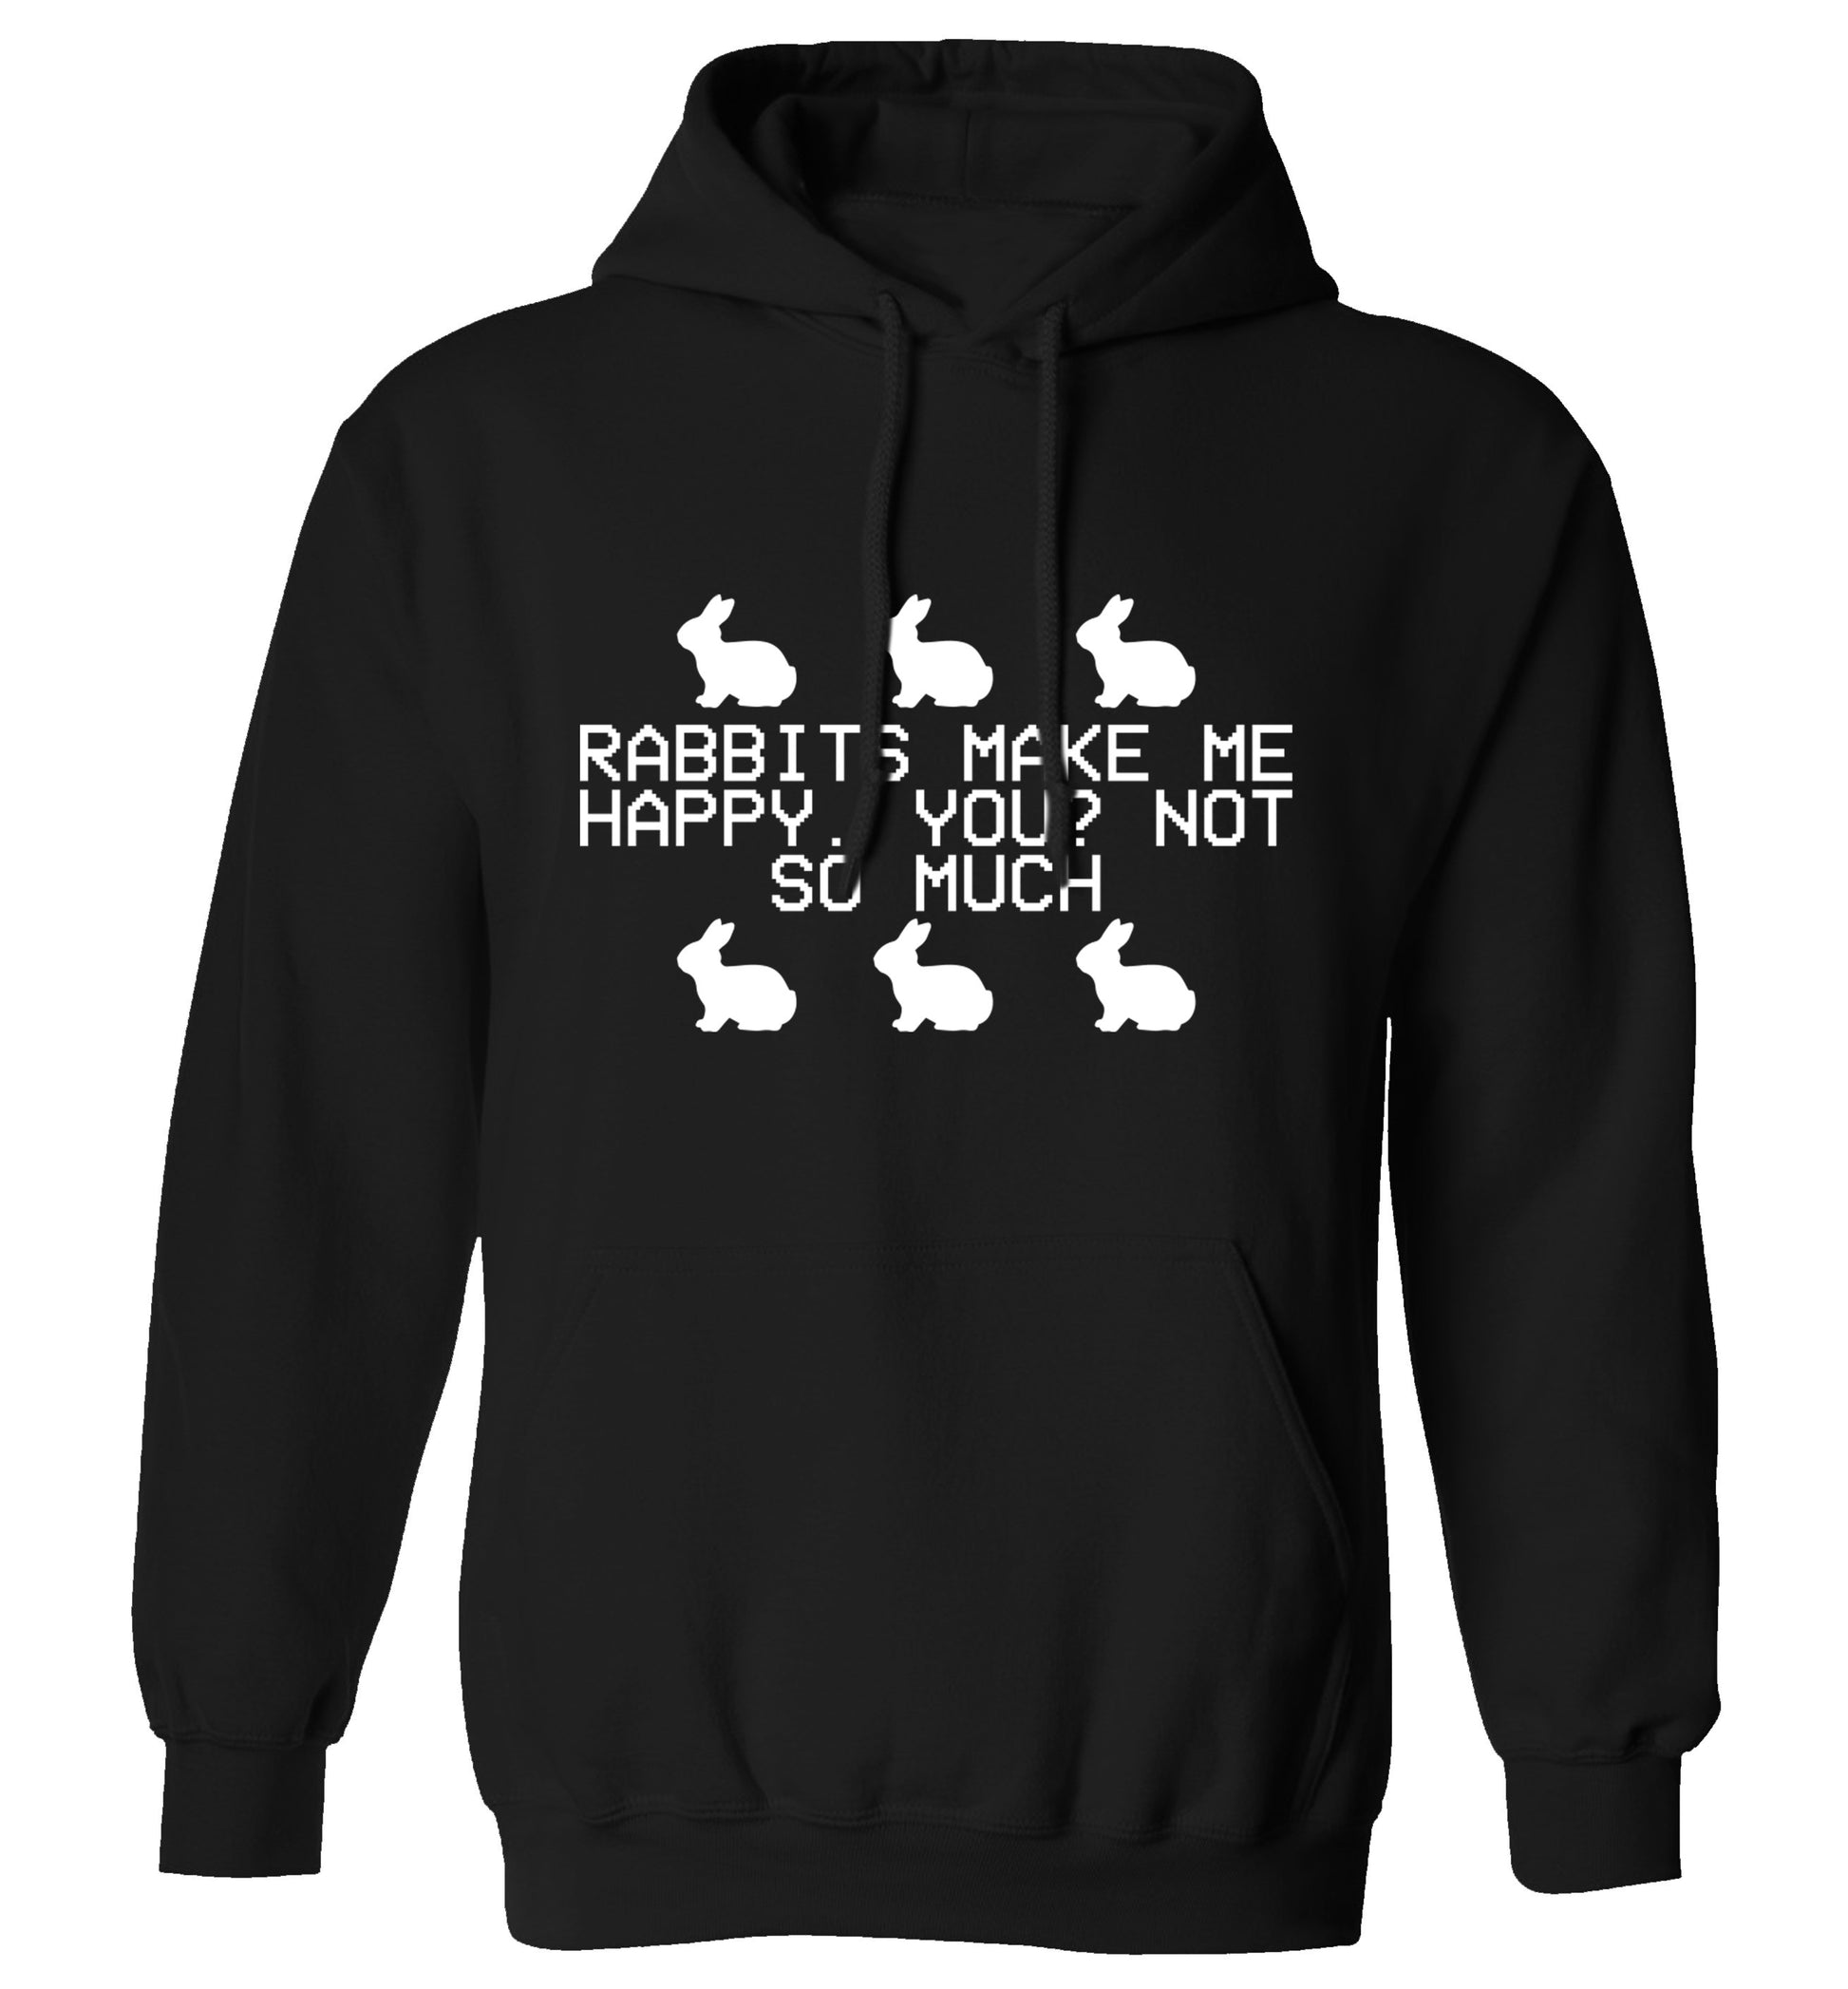 Rabbits make me happy, you not so much adults unisex black hoodie 2XL